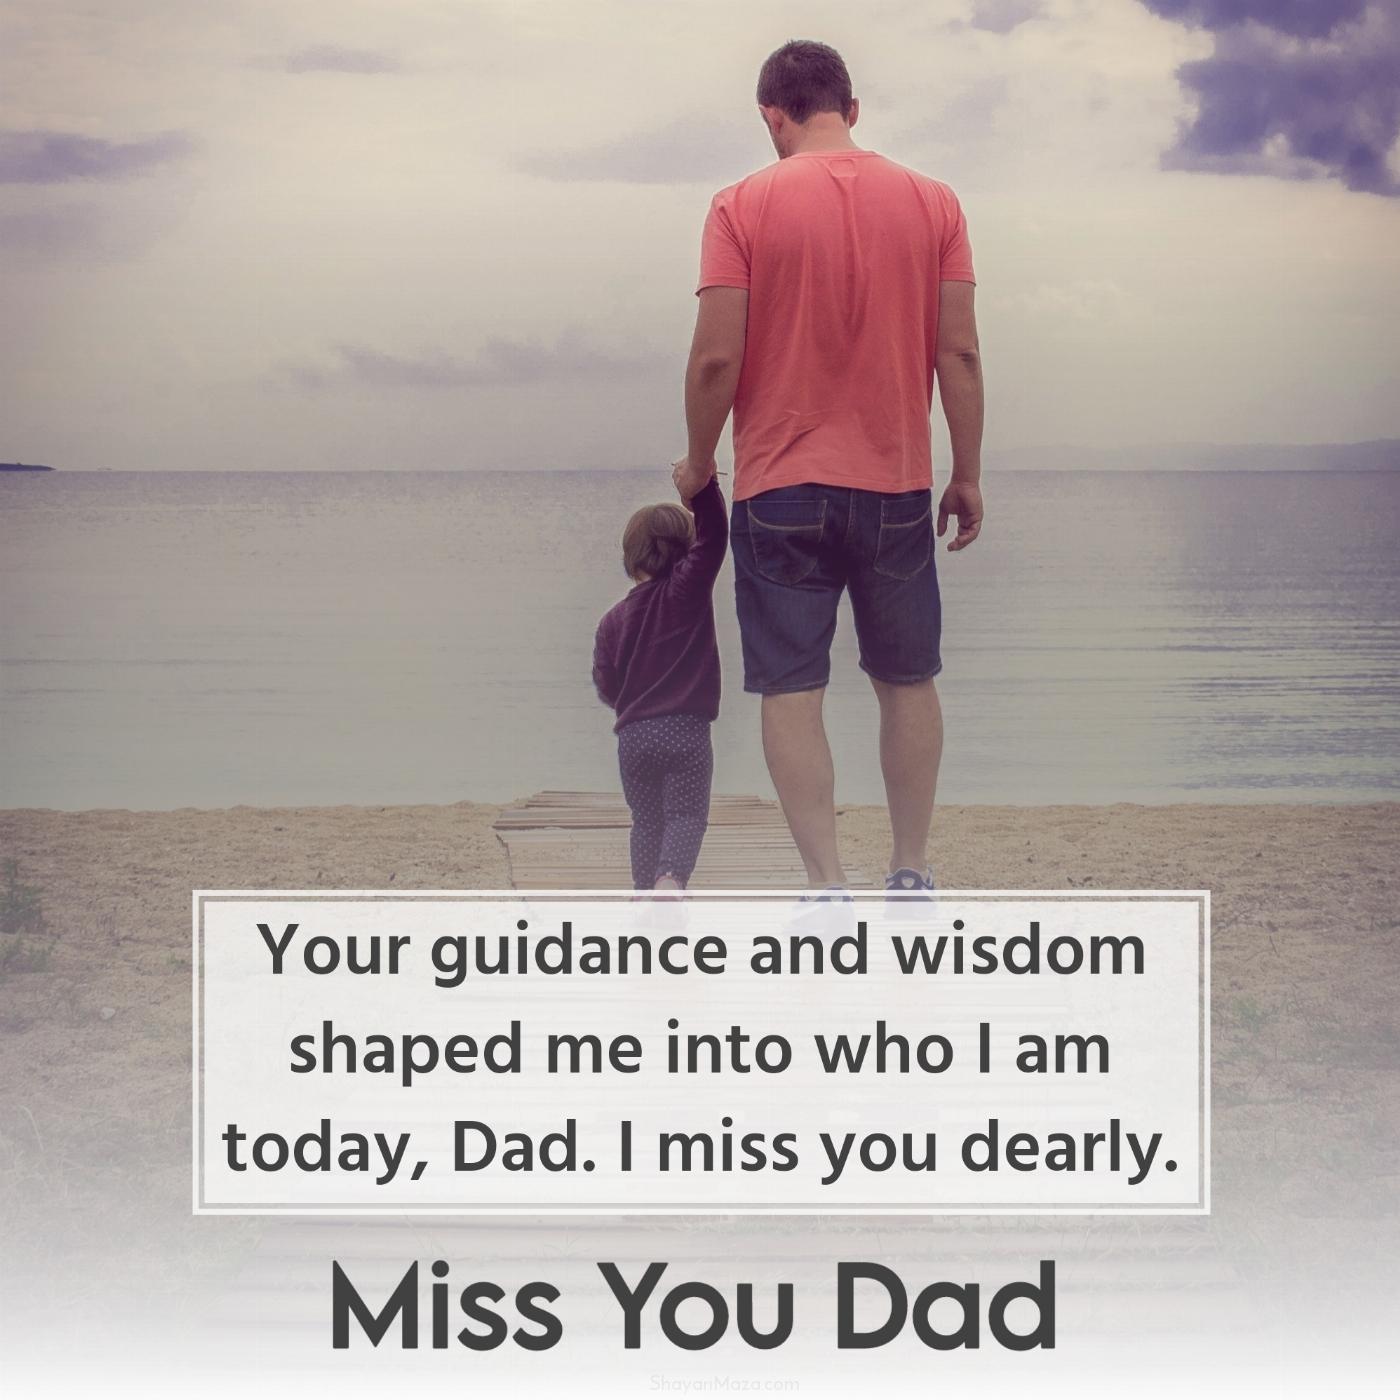 Your guidance and wisdom shaped me into who I am today Dad